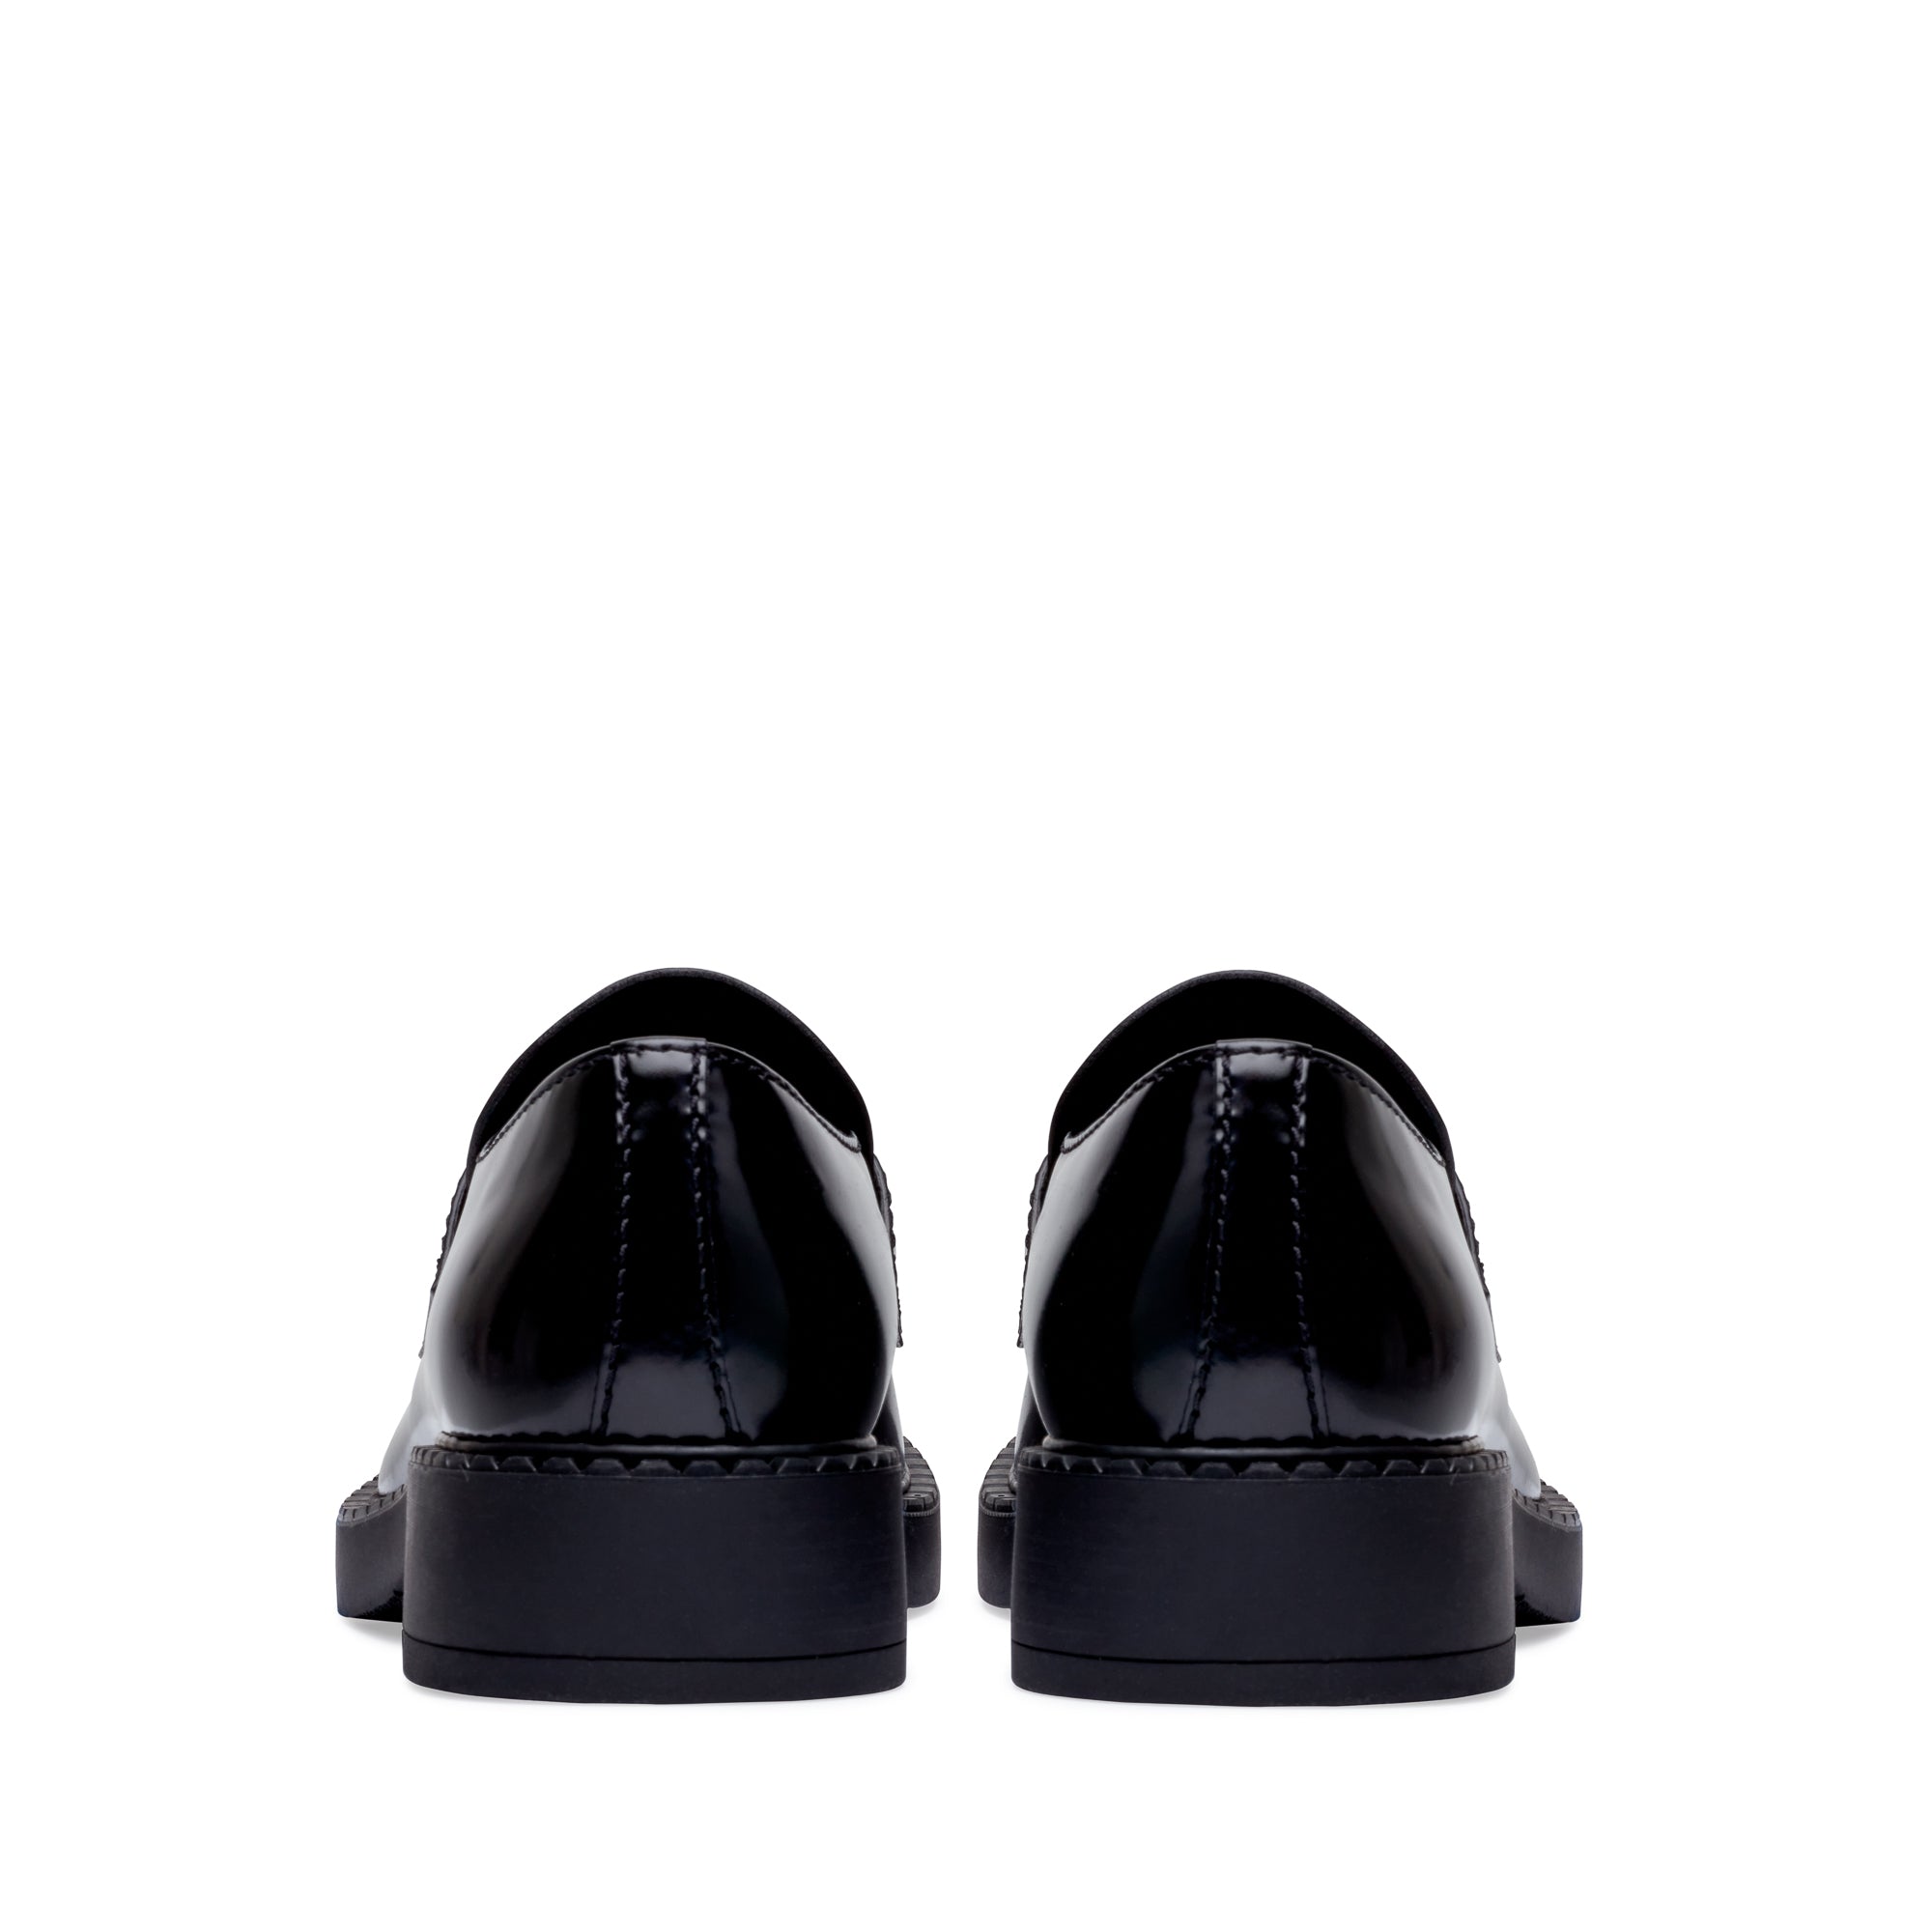 Prada - Men's Brushed Leather Loafers - (Black) view 4